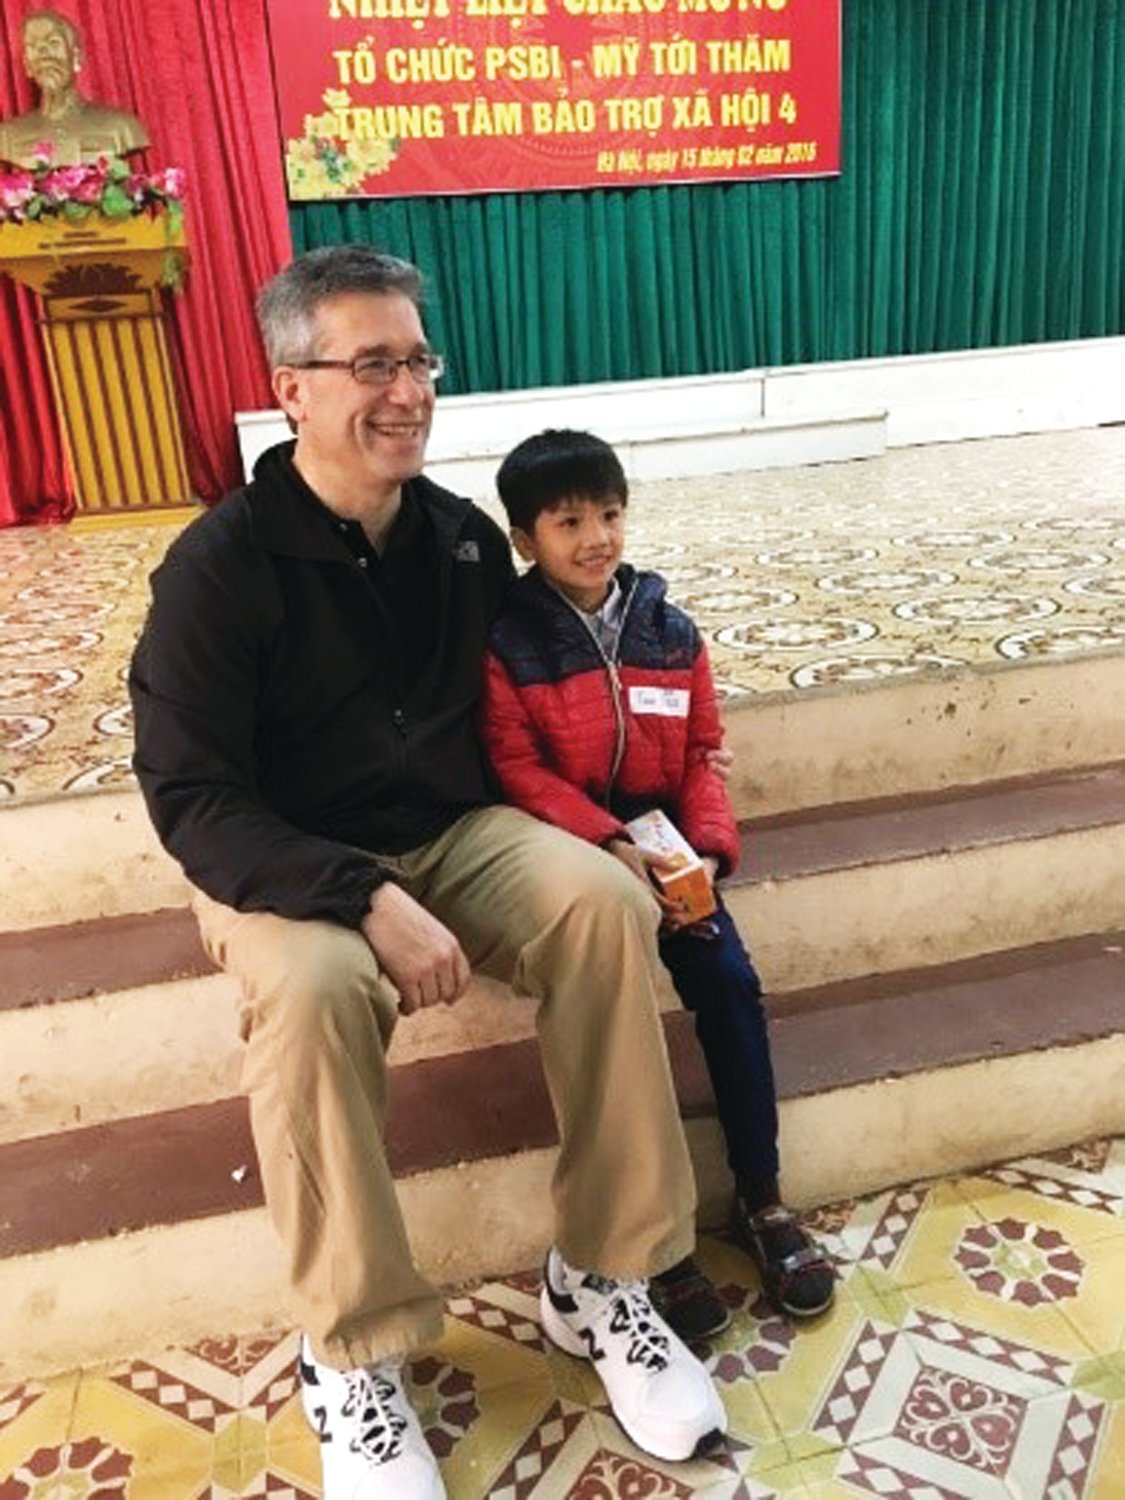 David Ballai chats with a Vietnamese boy during his visit to that country with Pearl S. Buck International.